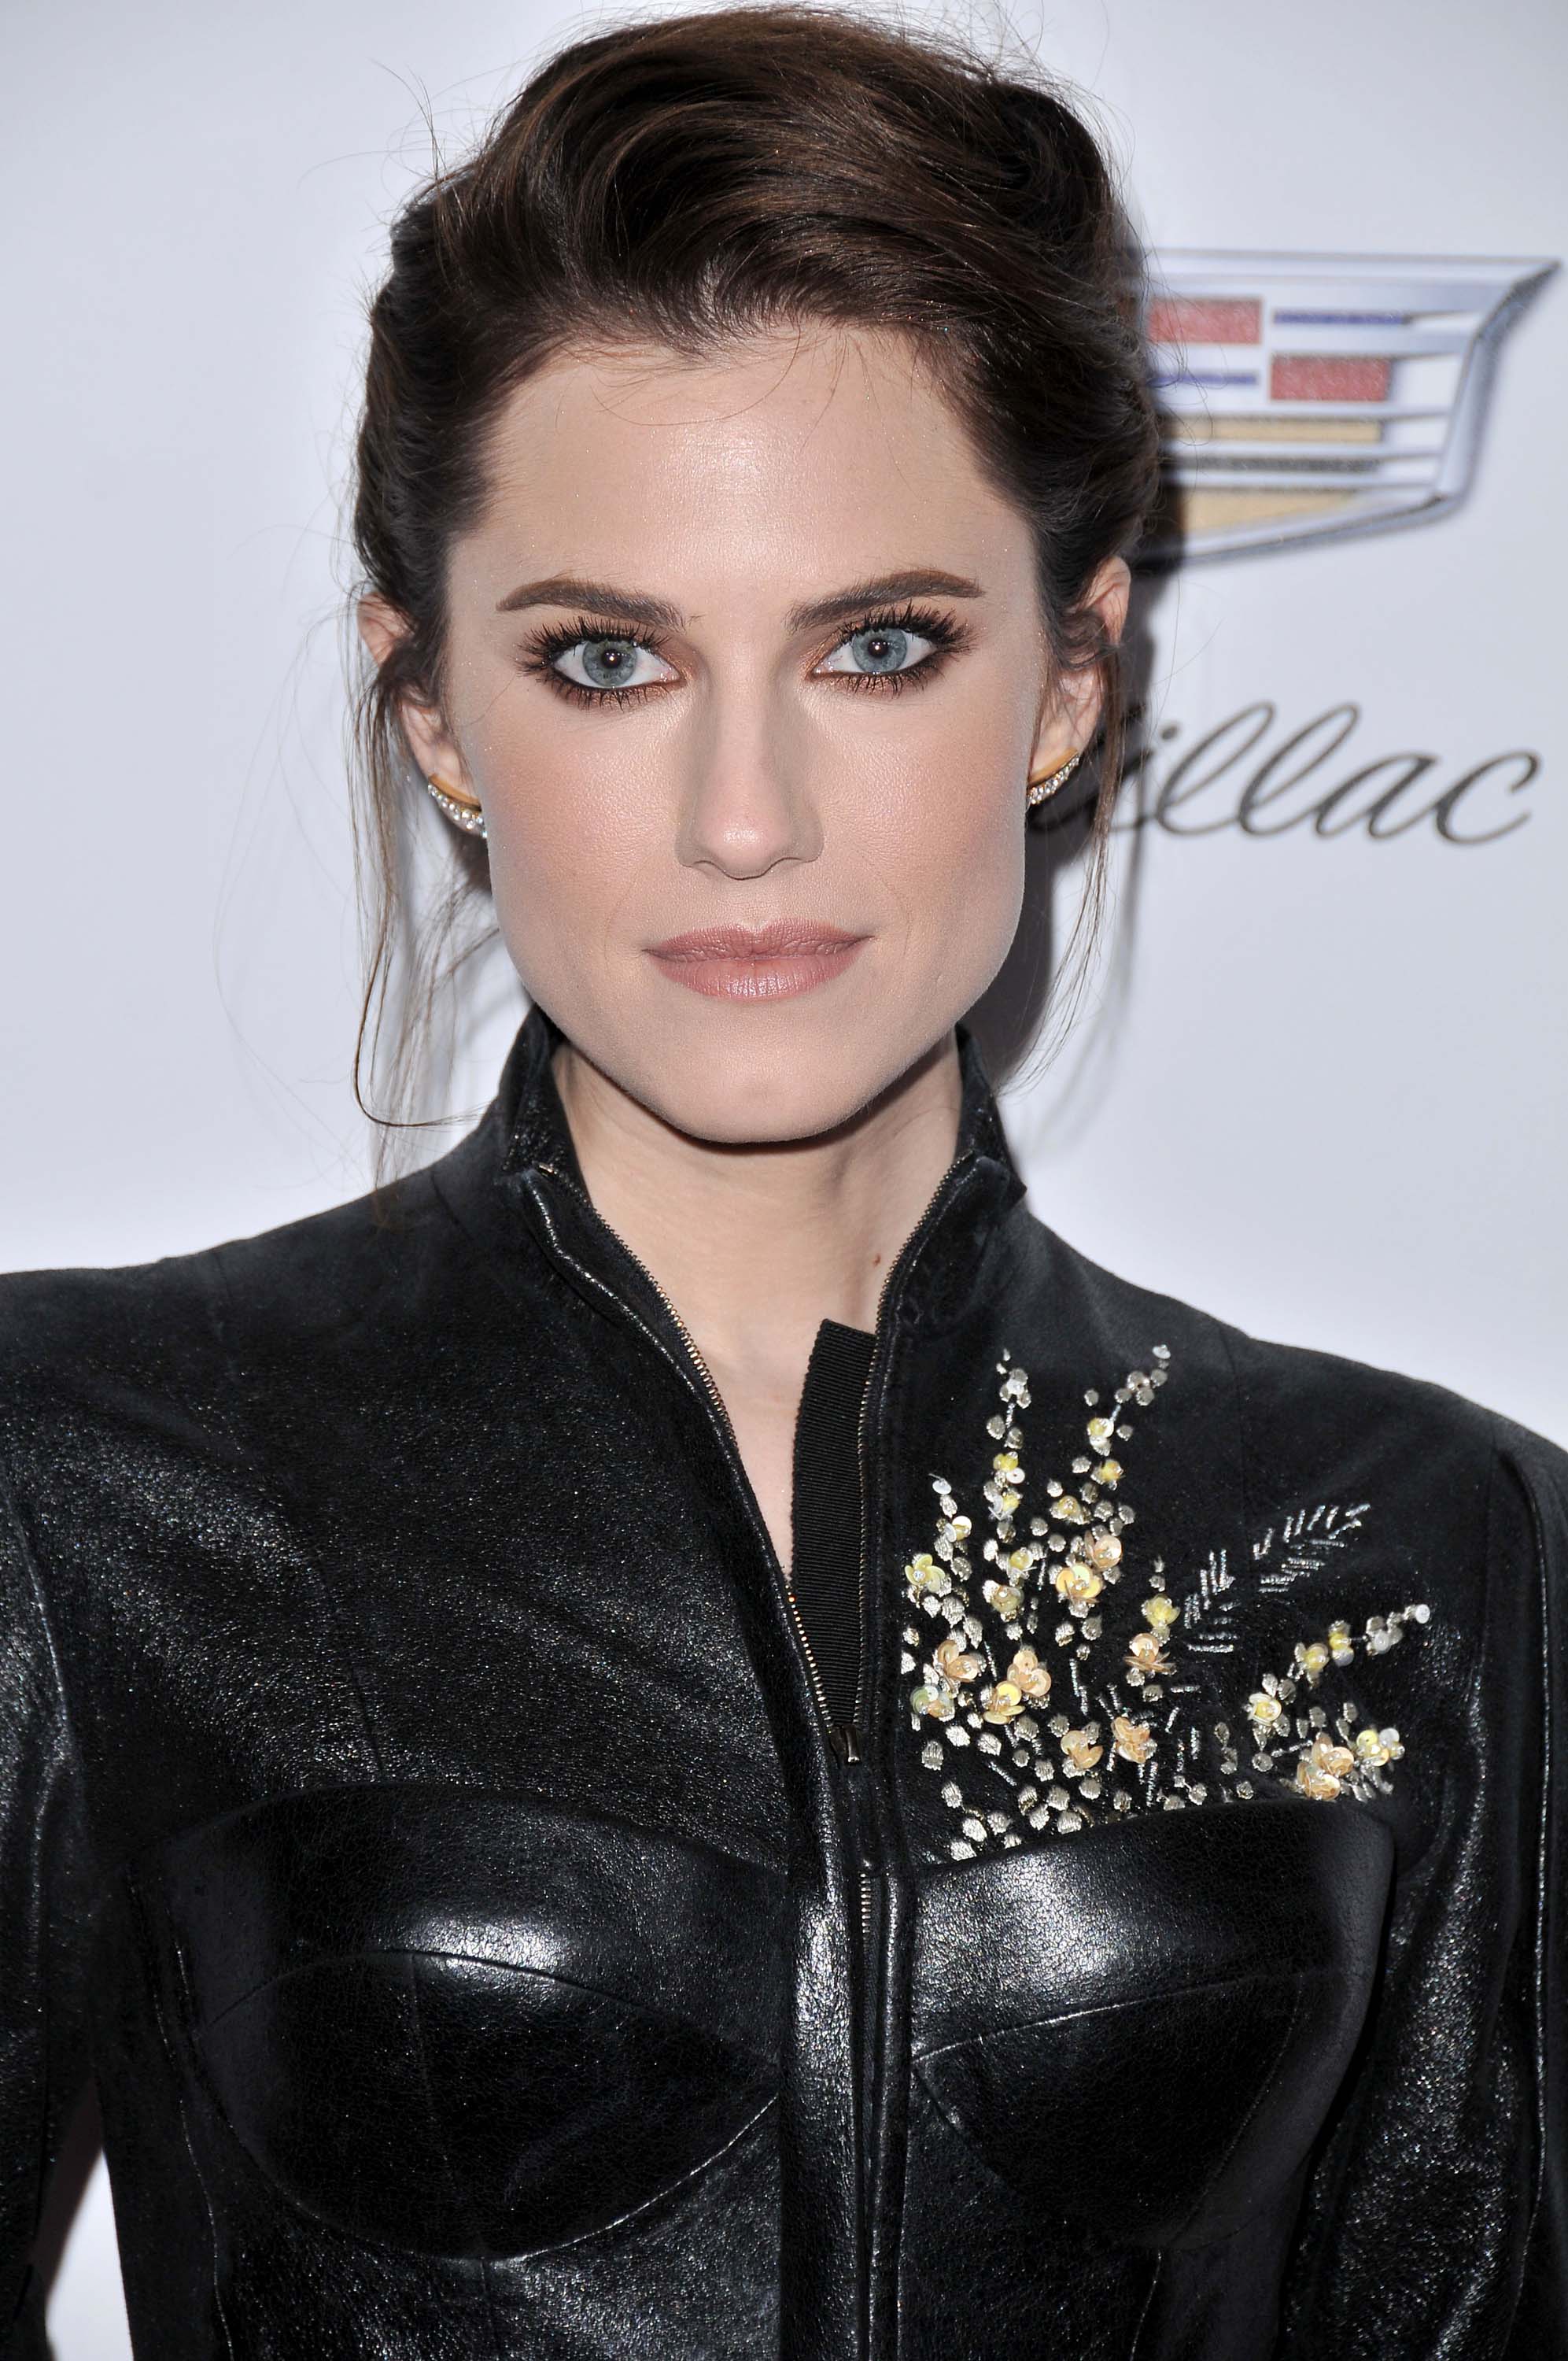 Allison Williams attends Producers Guild Awards